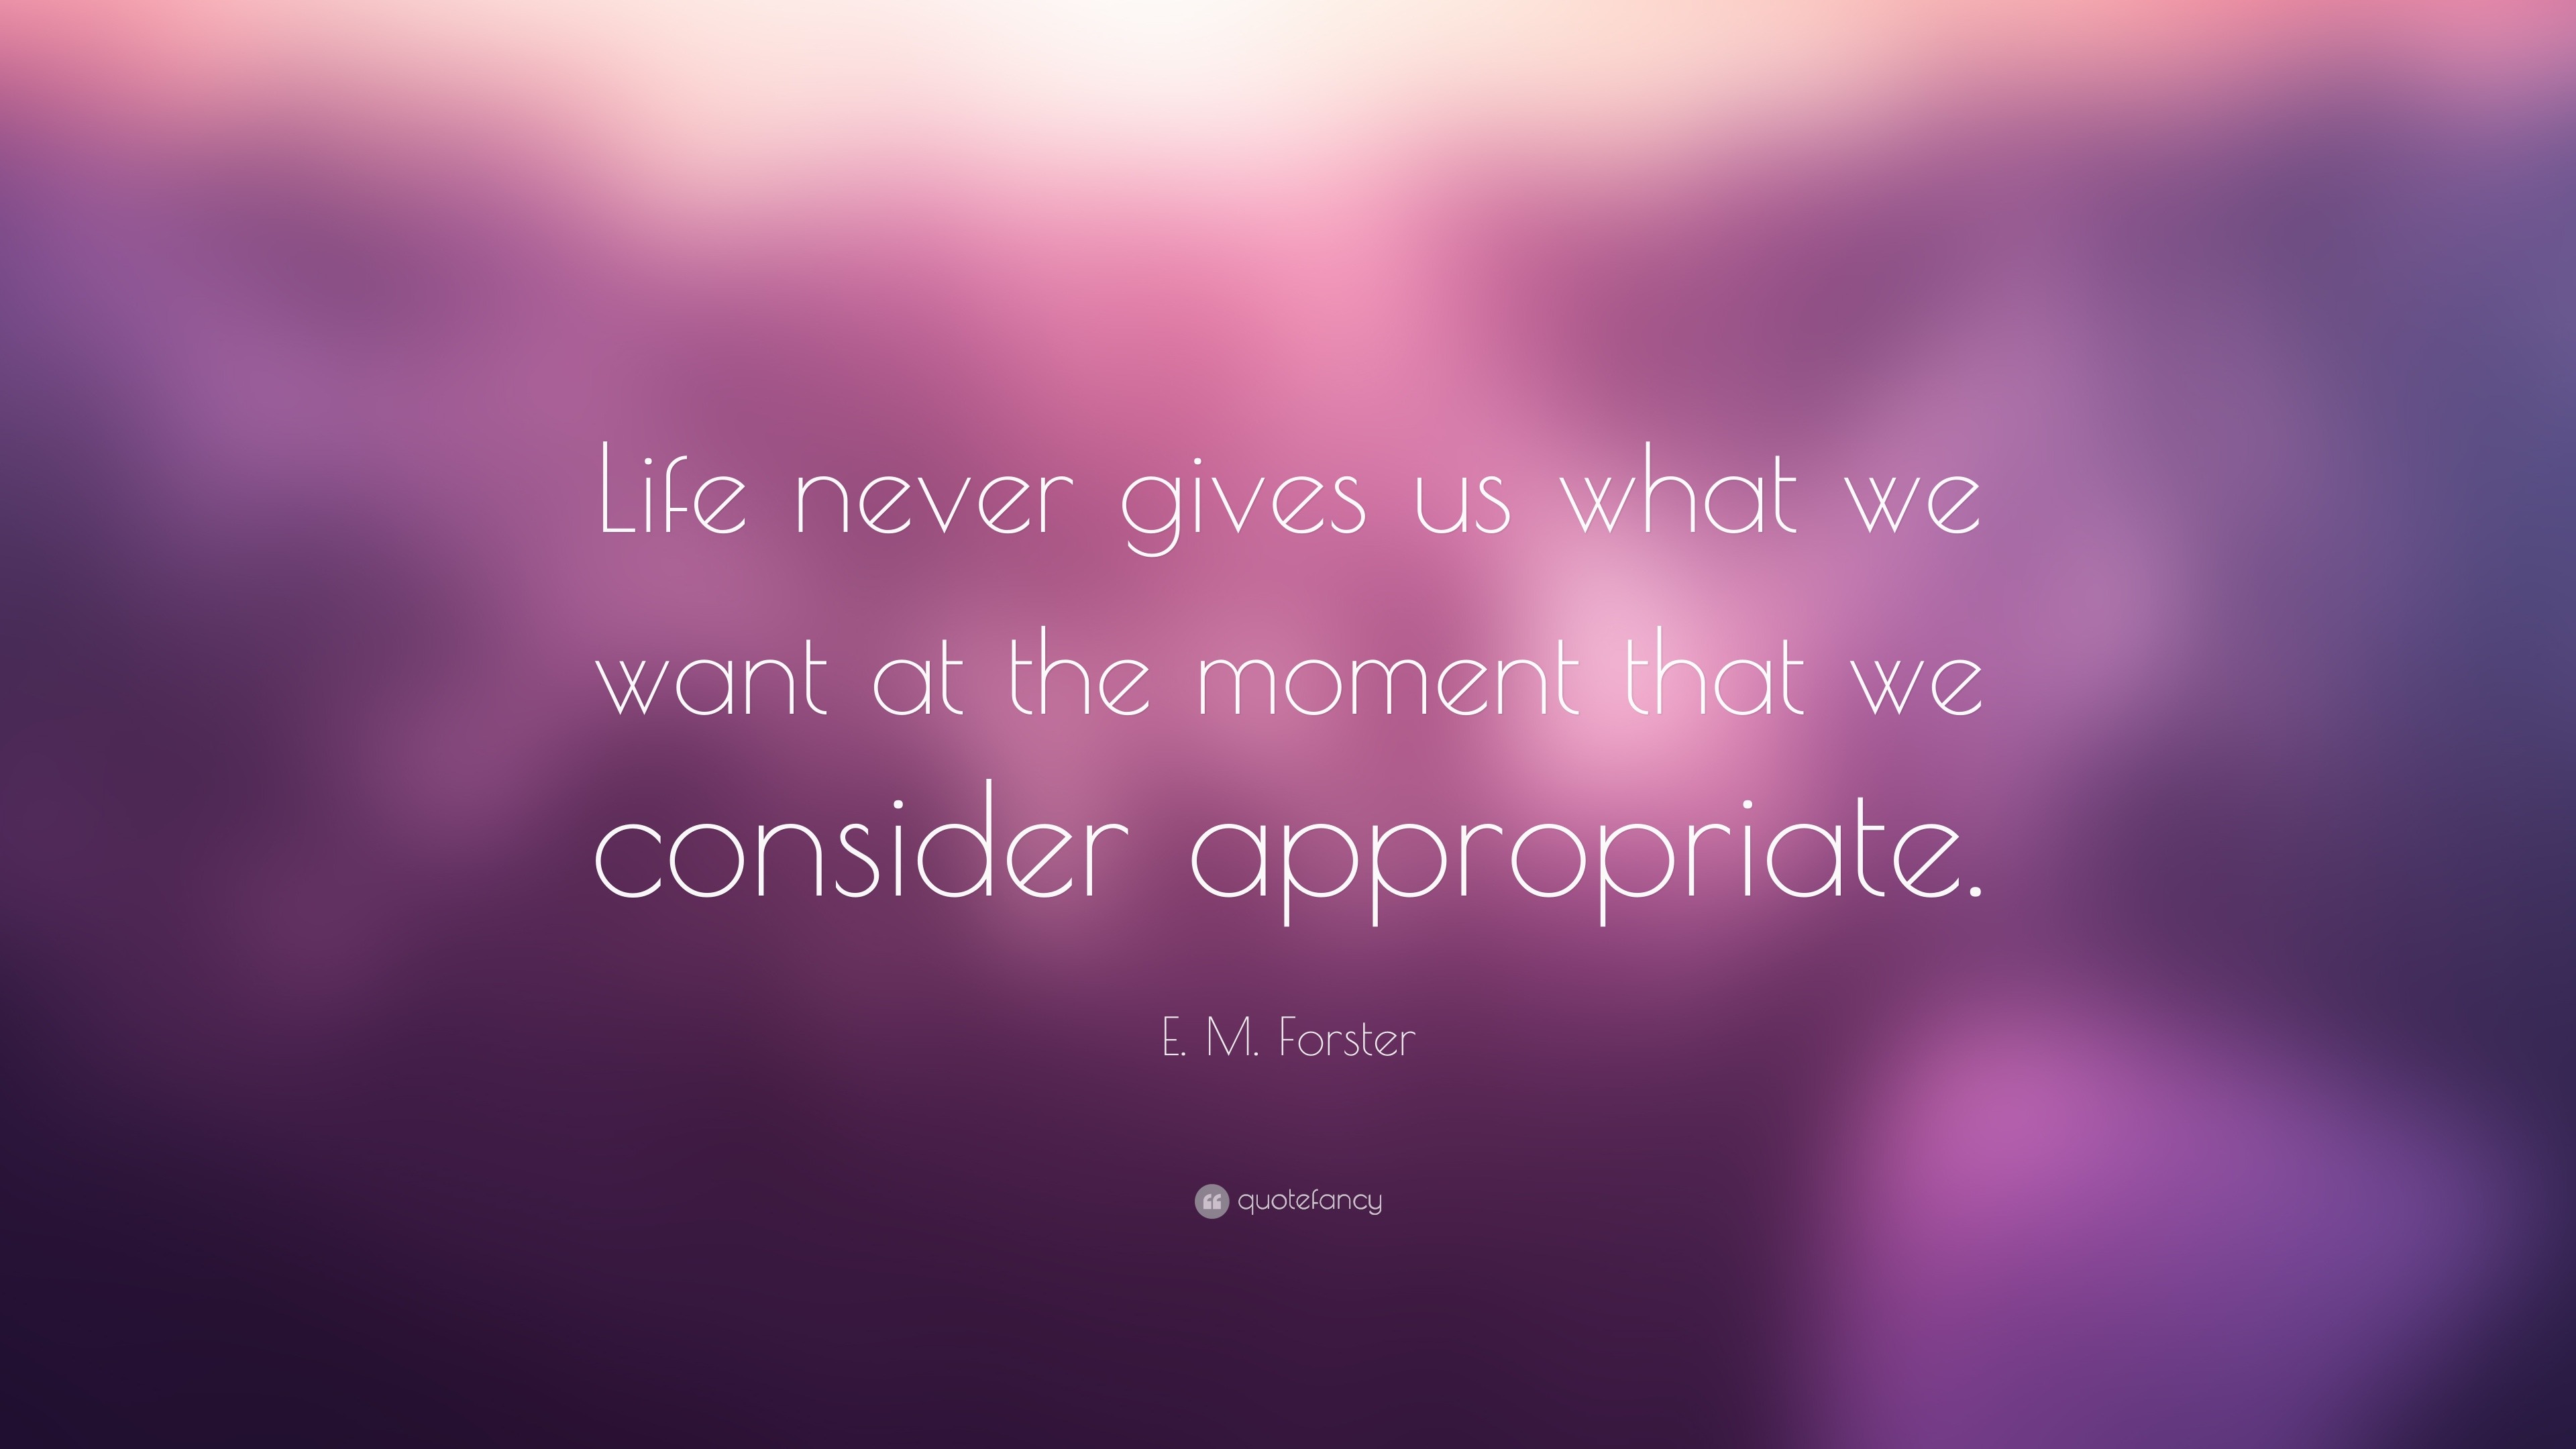 E M Forster Quote “Life never gives us what we want at the moment that